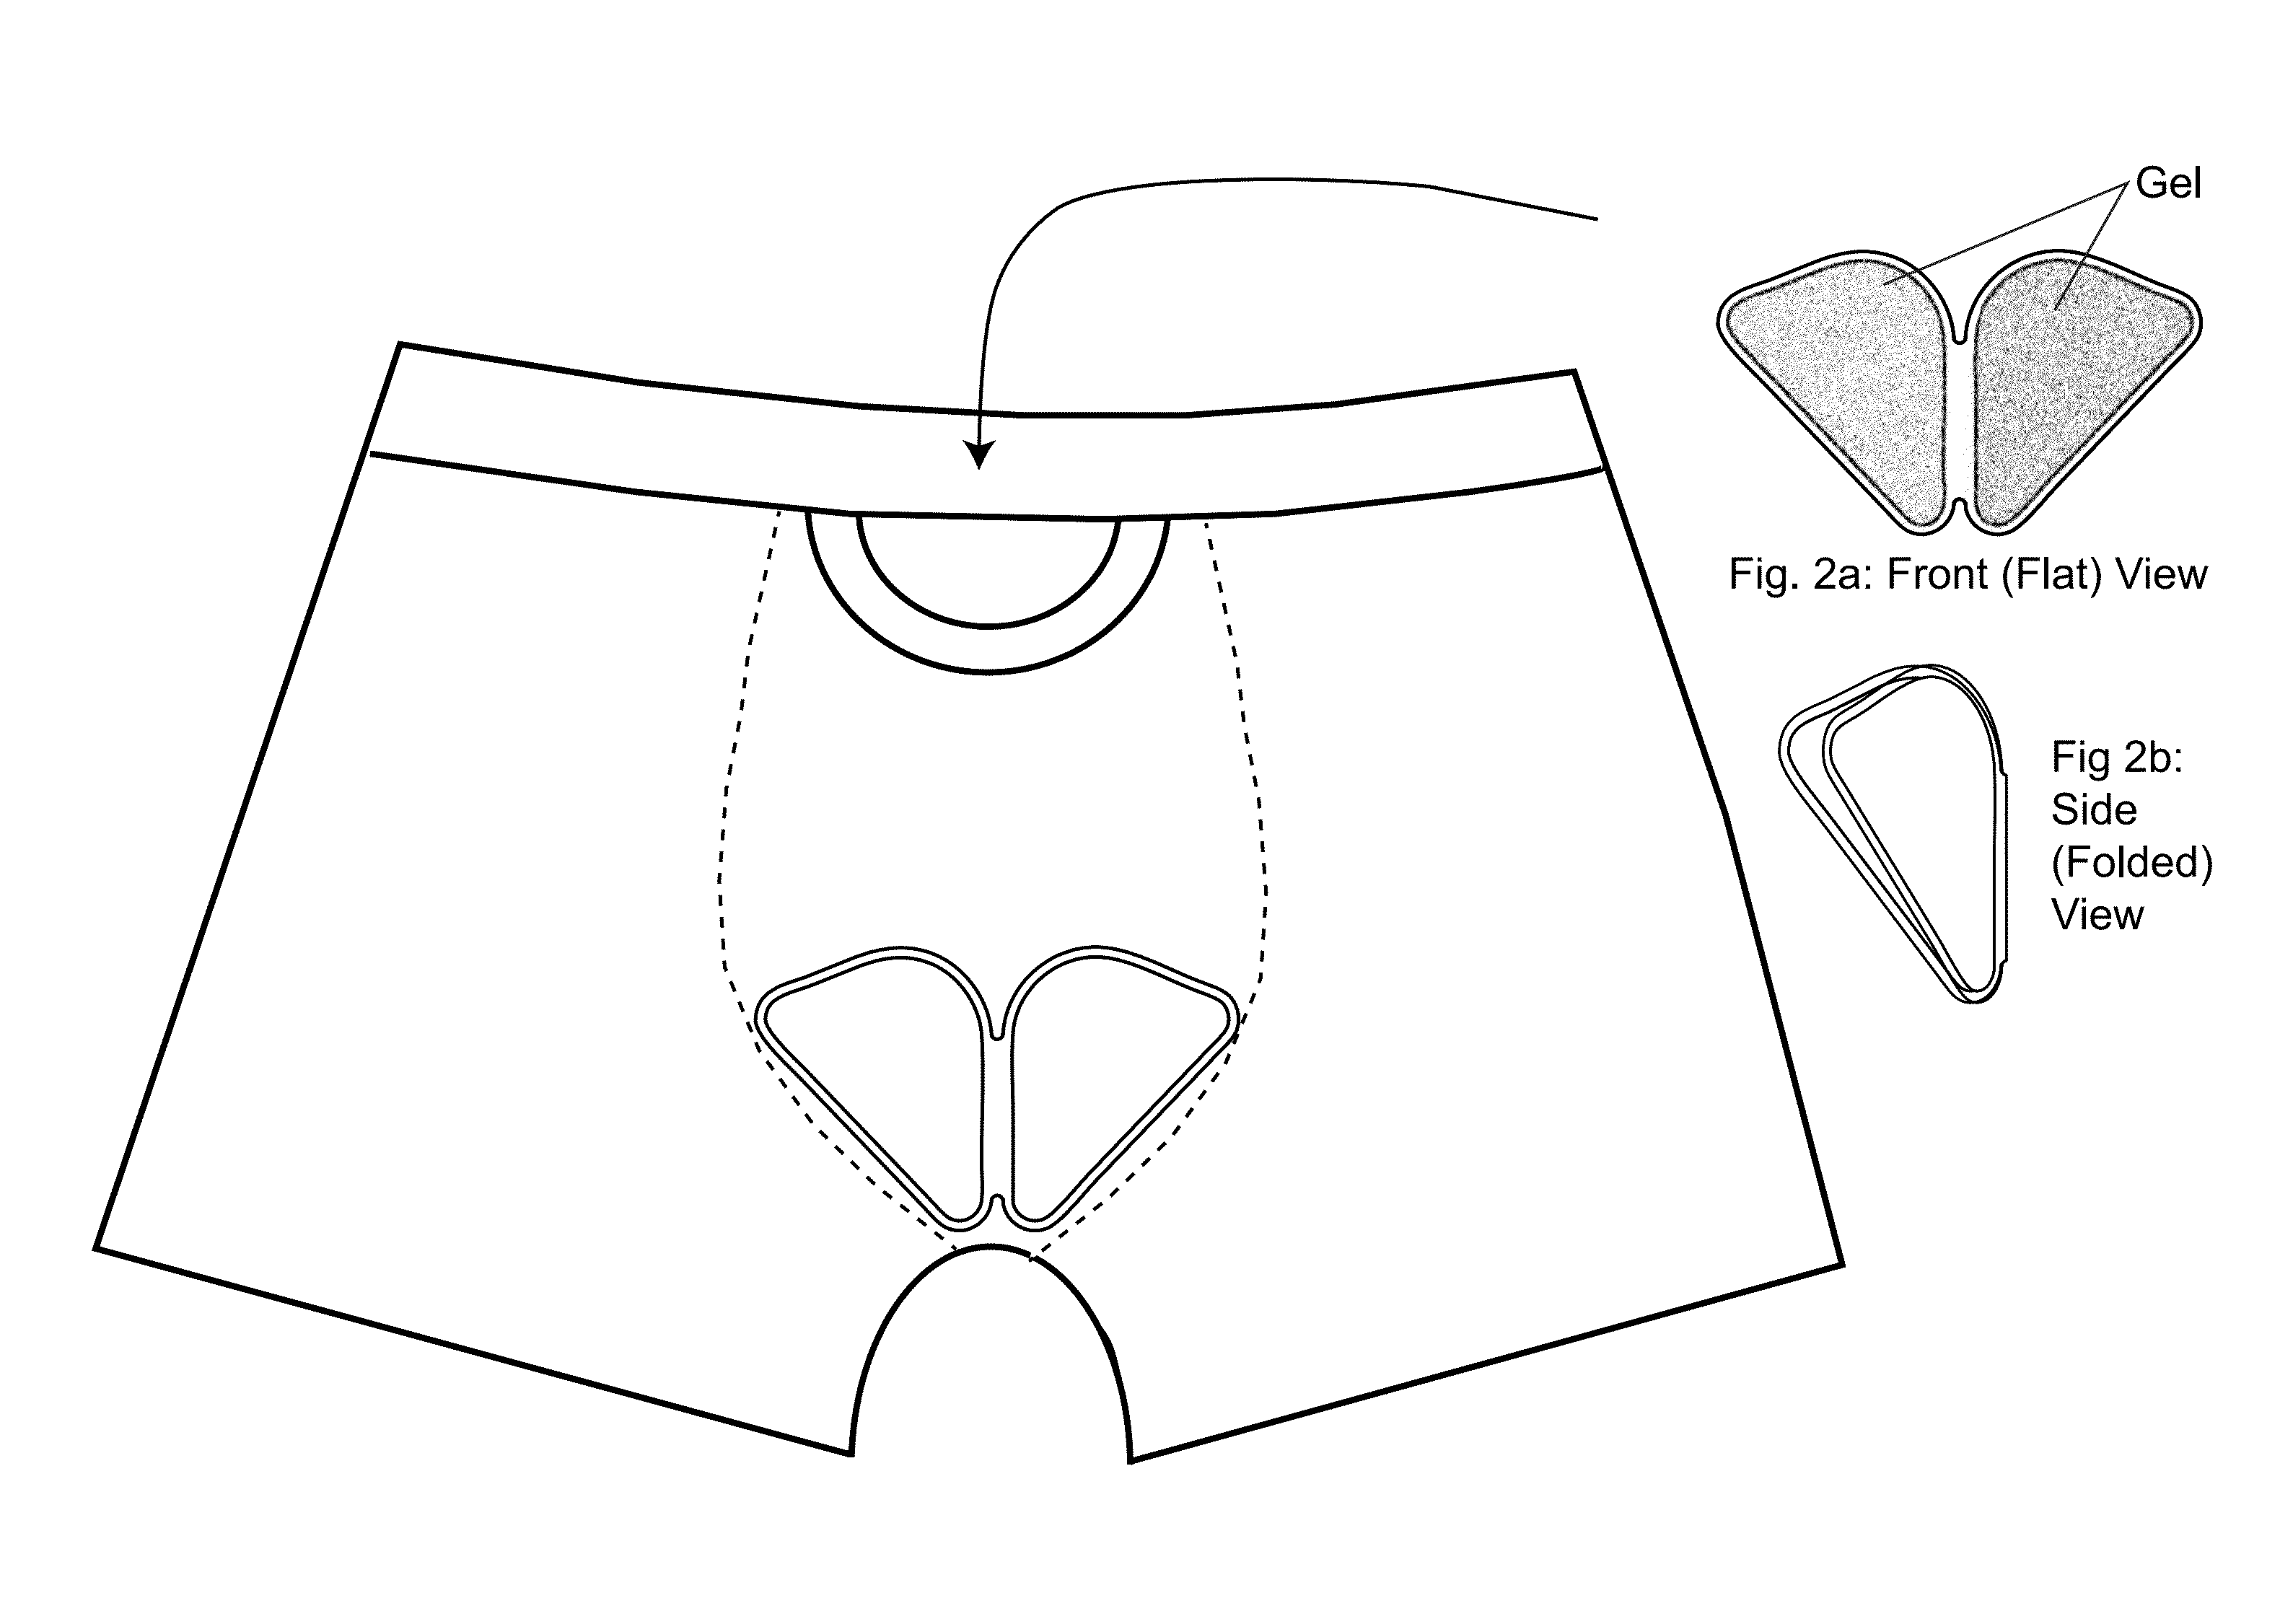 Men's underwear with fitted frontal pouch and removable ergonomic gel pack for testicular cooling